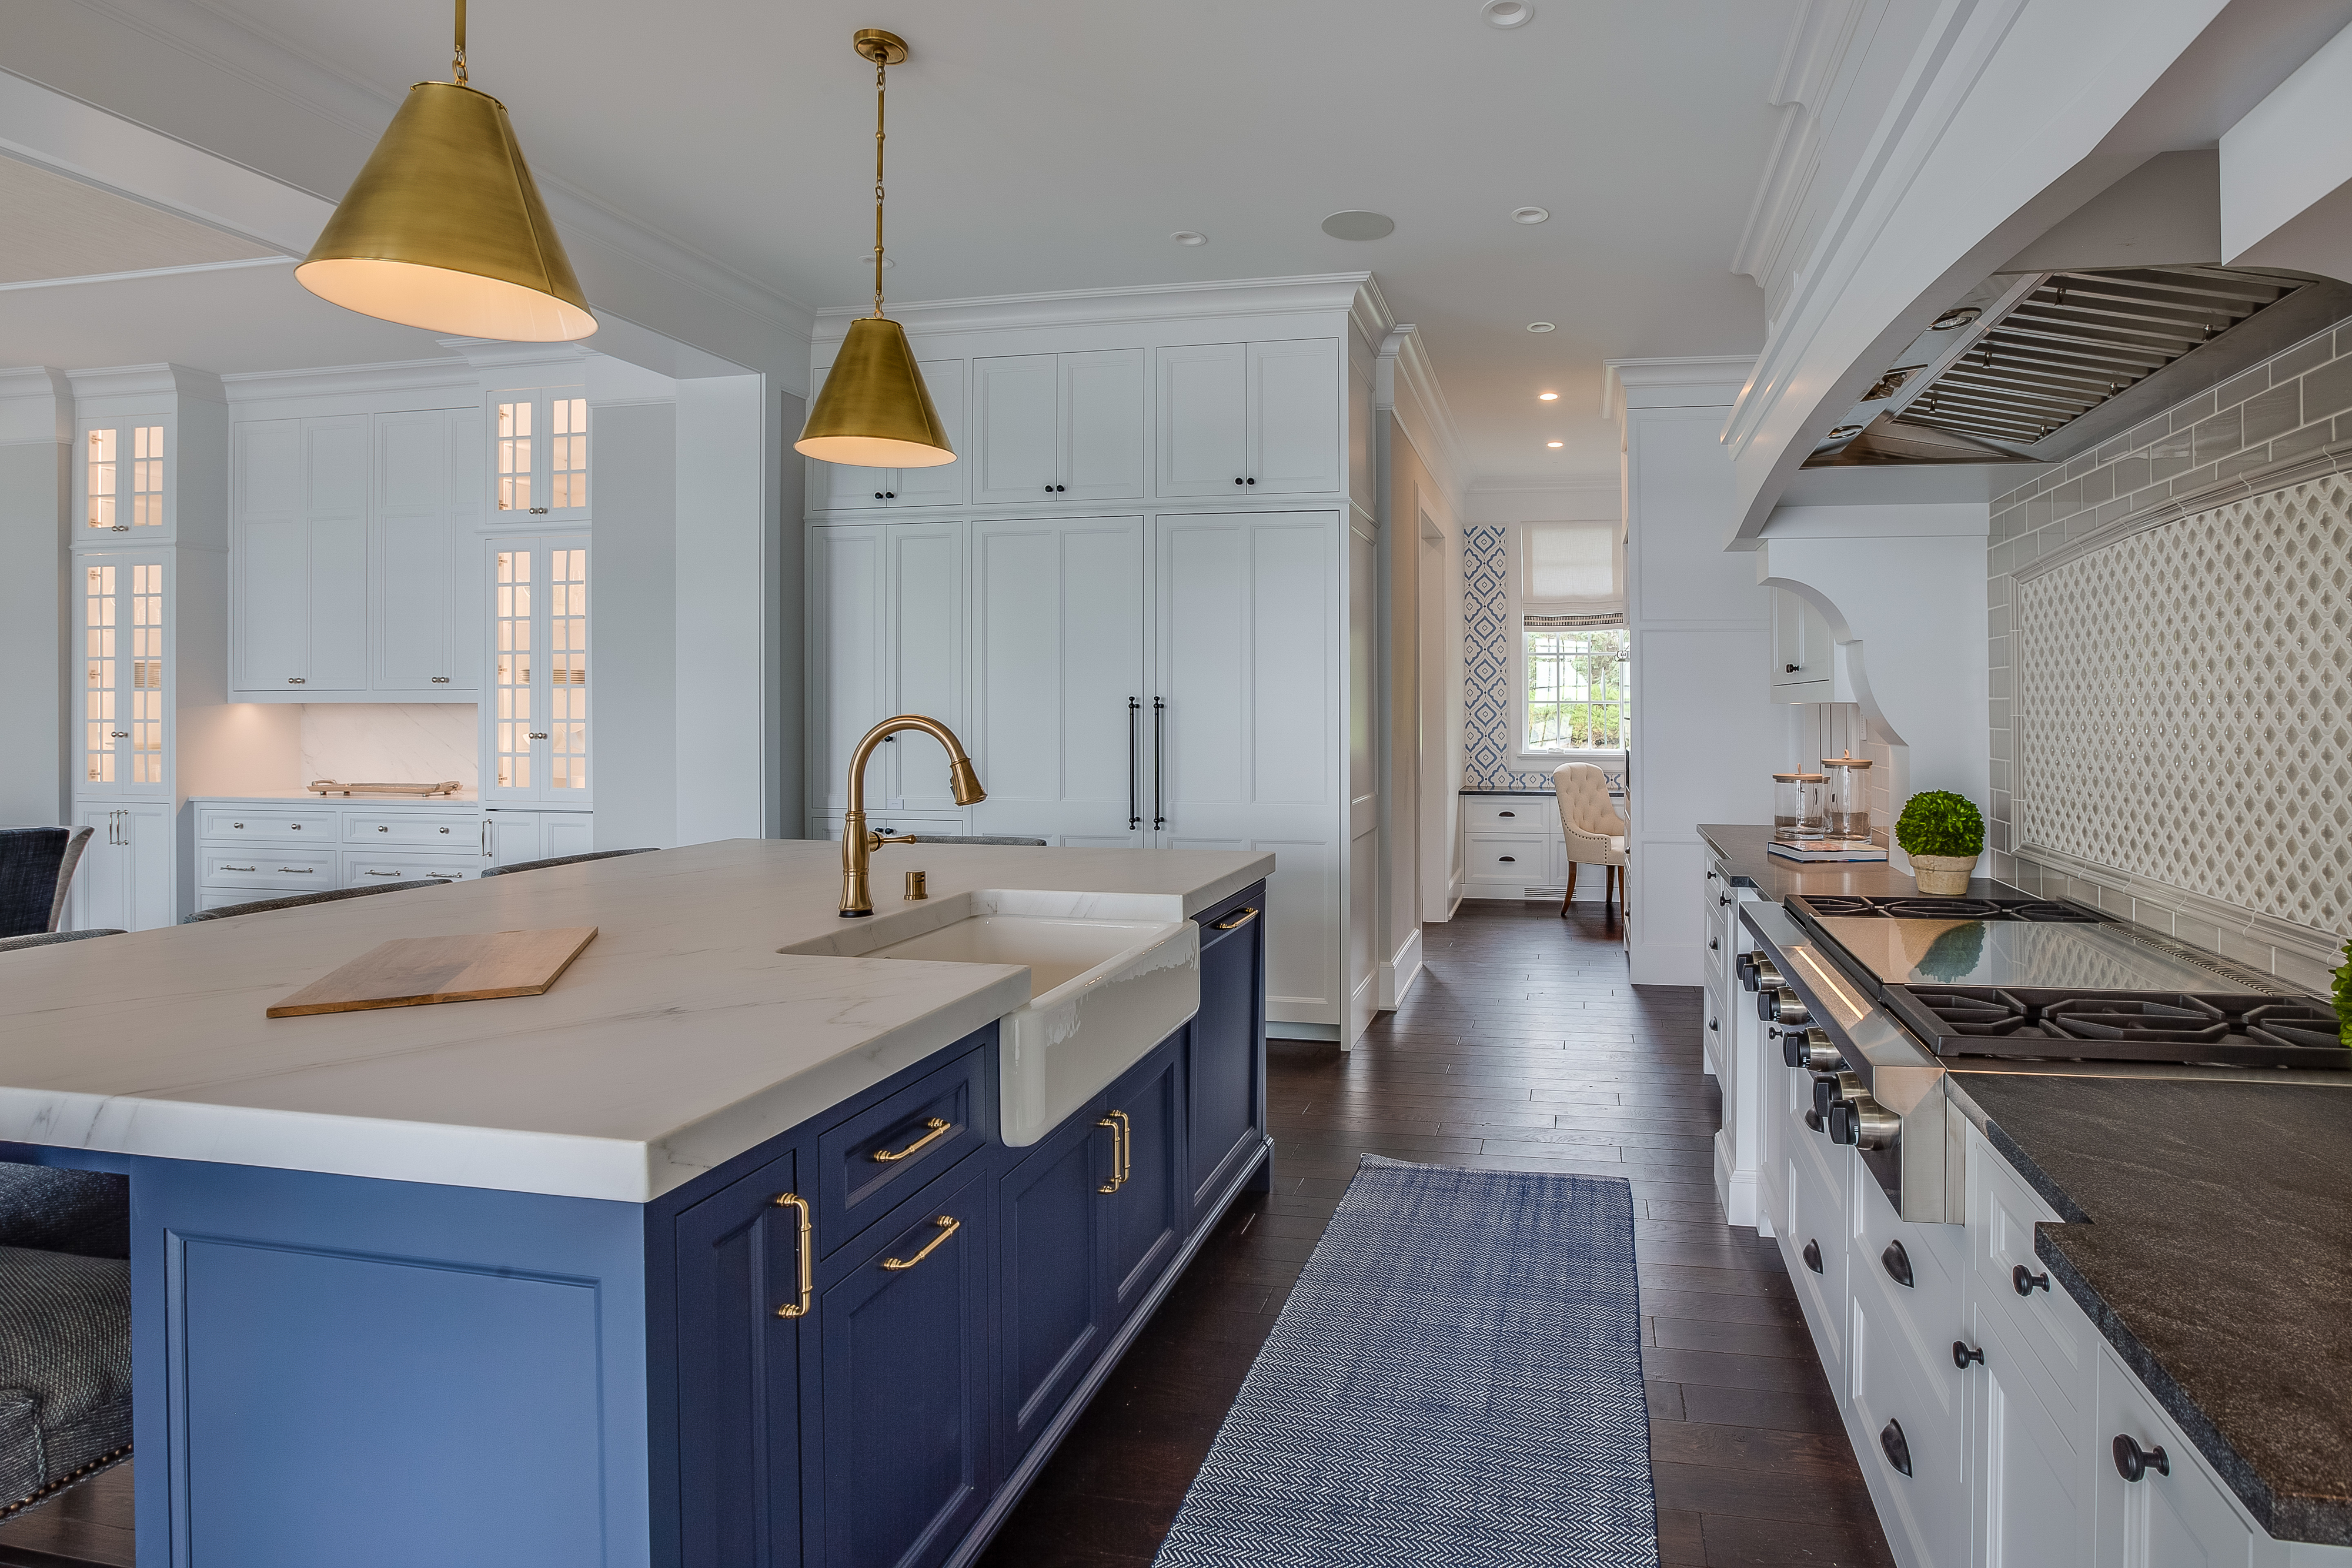 Modern kitchen with white cabinetry, blue island, and gold fixtures